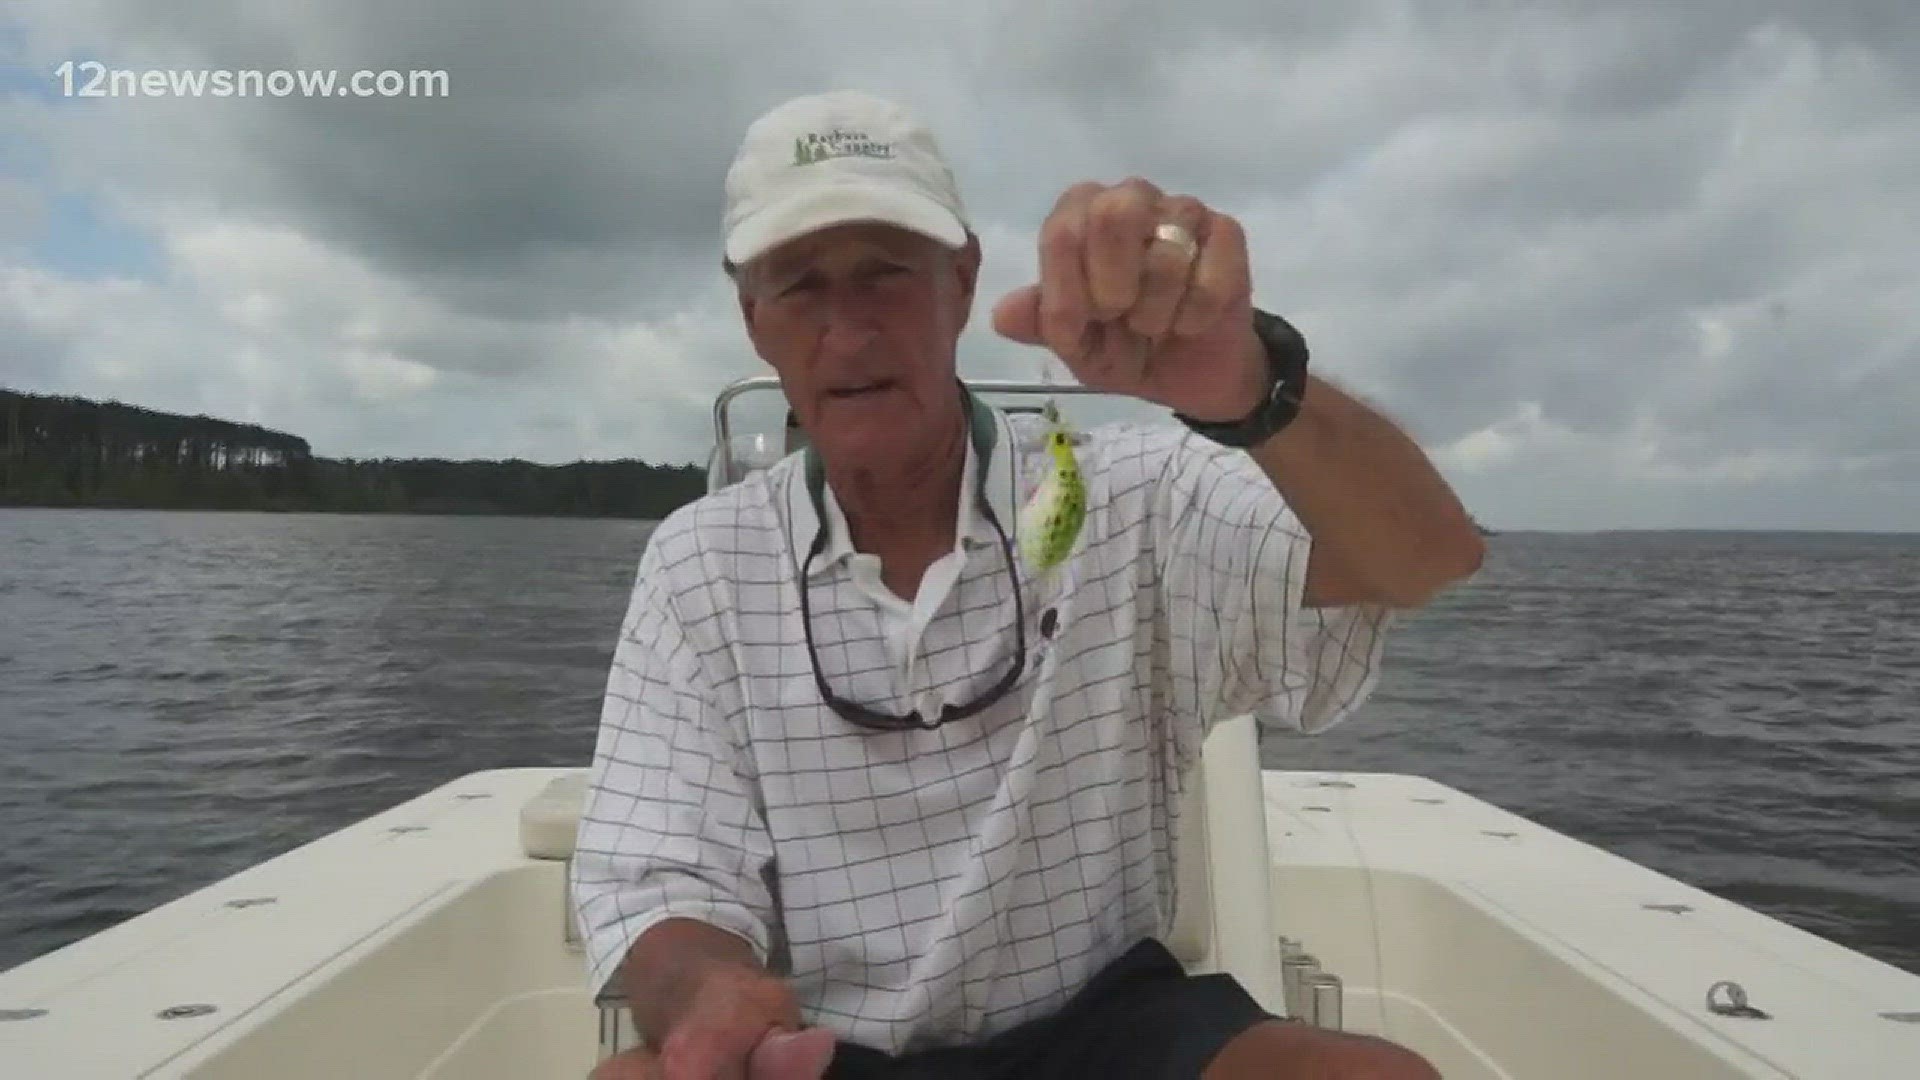 J.D. Batten suggests a top water lure for those slow summer fishing days on the lake